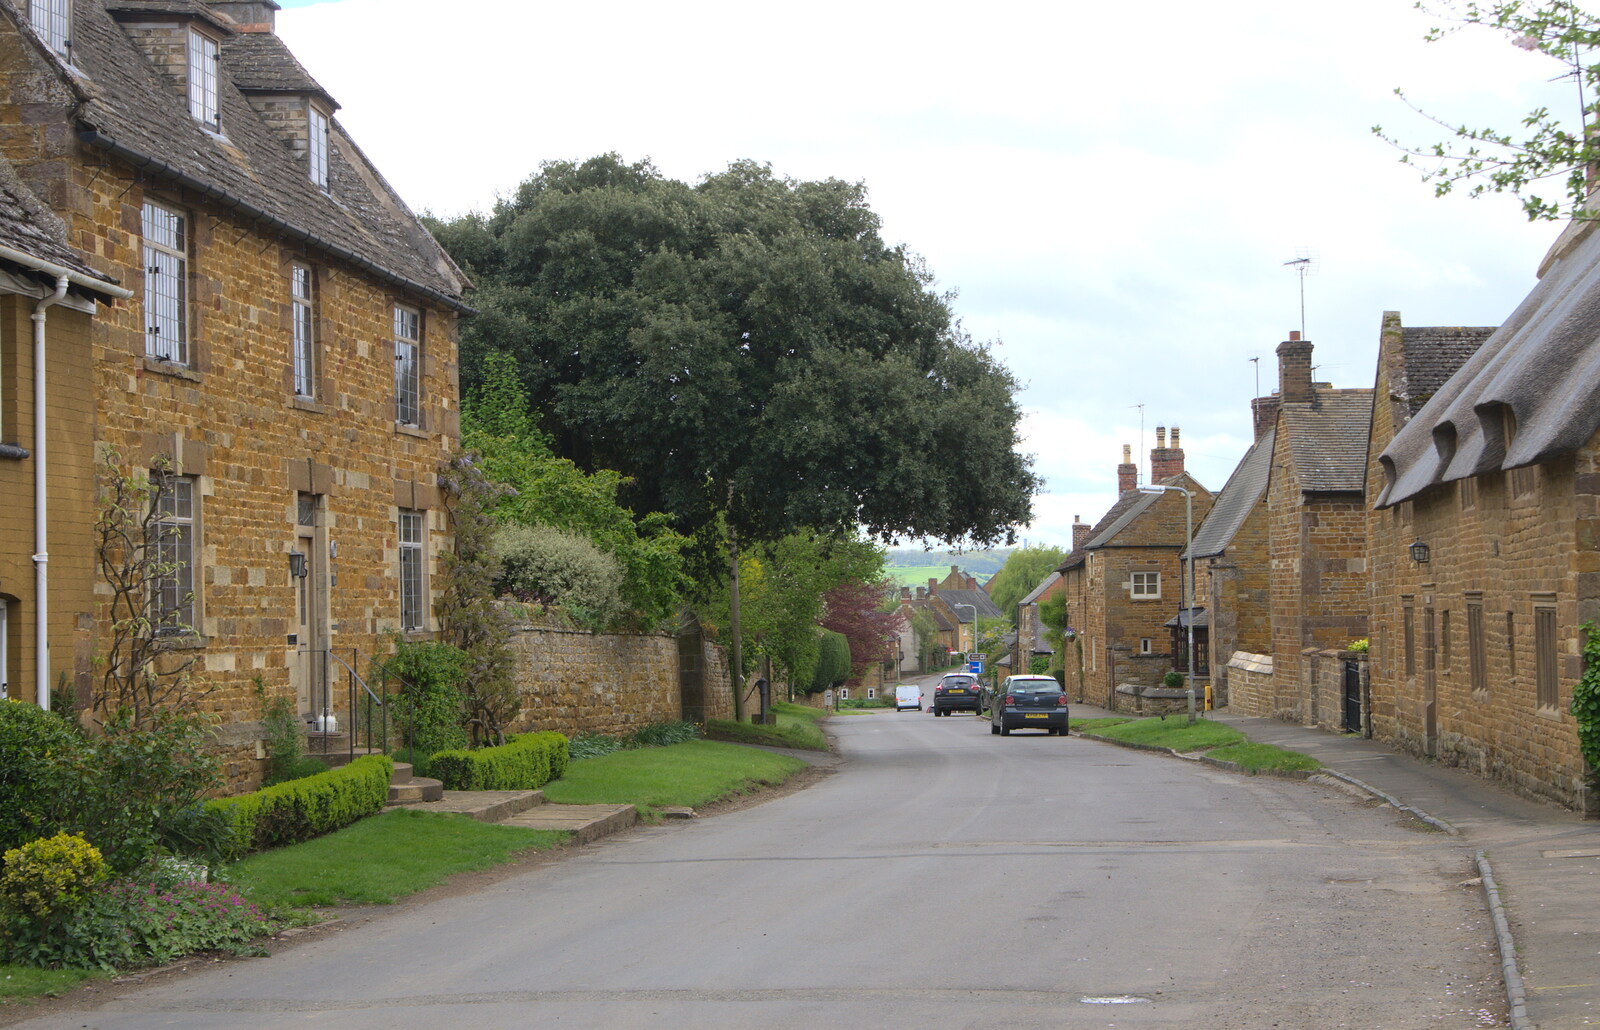 Lyddington's absurdely-picturesque Main Street from The BSCC Weekend Away, Lyddington, Rutland - 9th May 2015